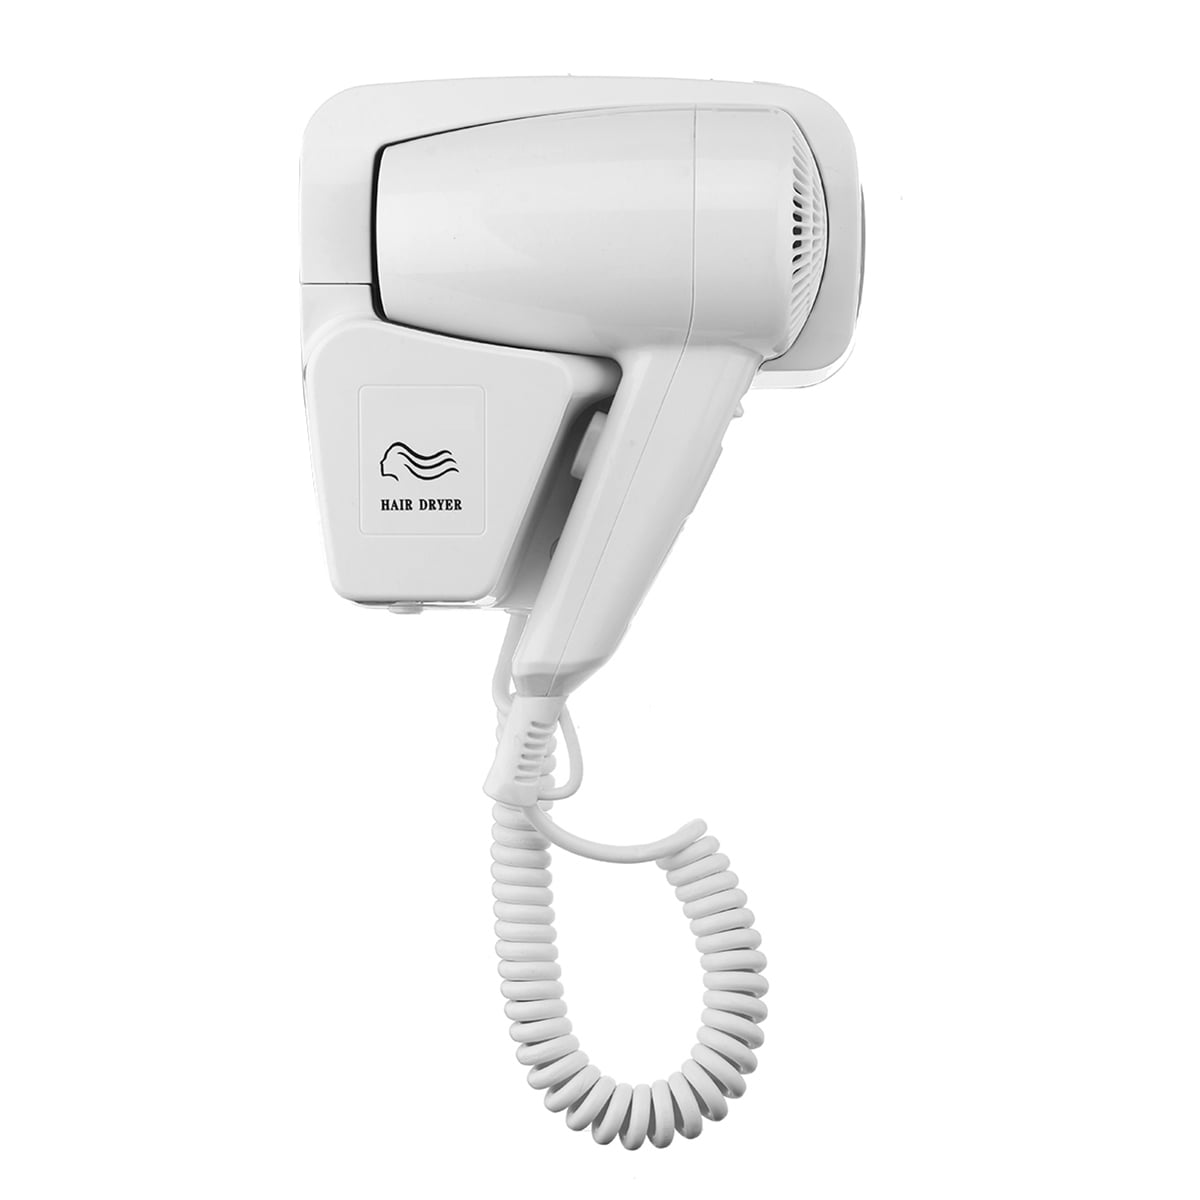 Wall Mount Blow Dryer Store, SAVE 38% 